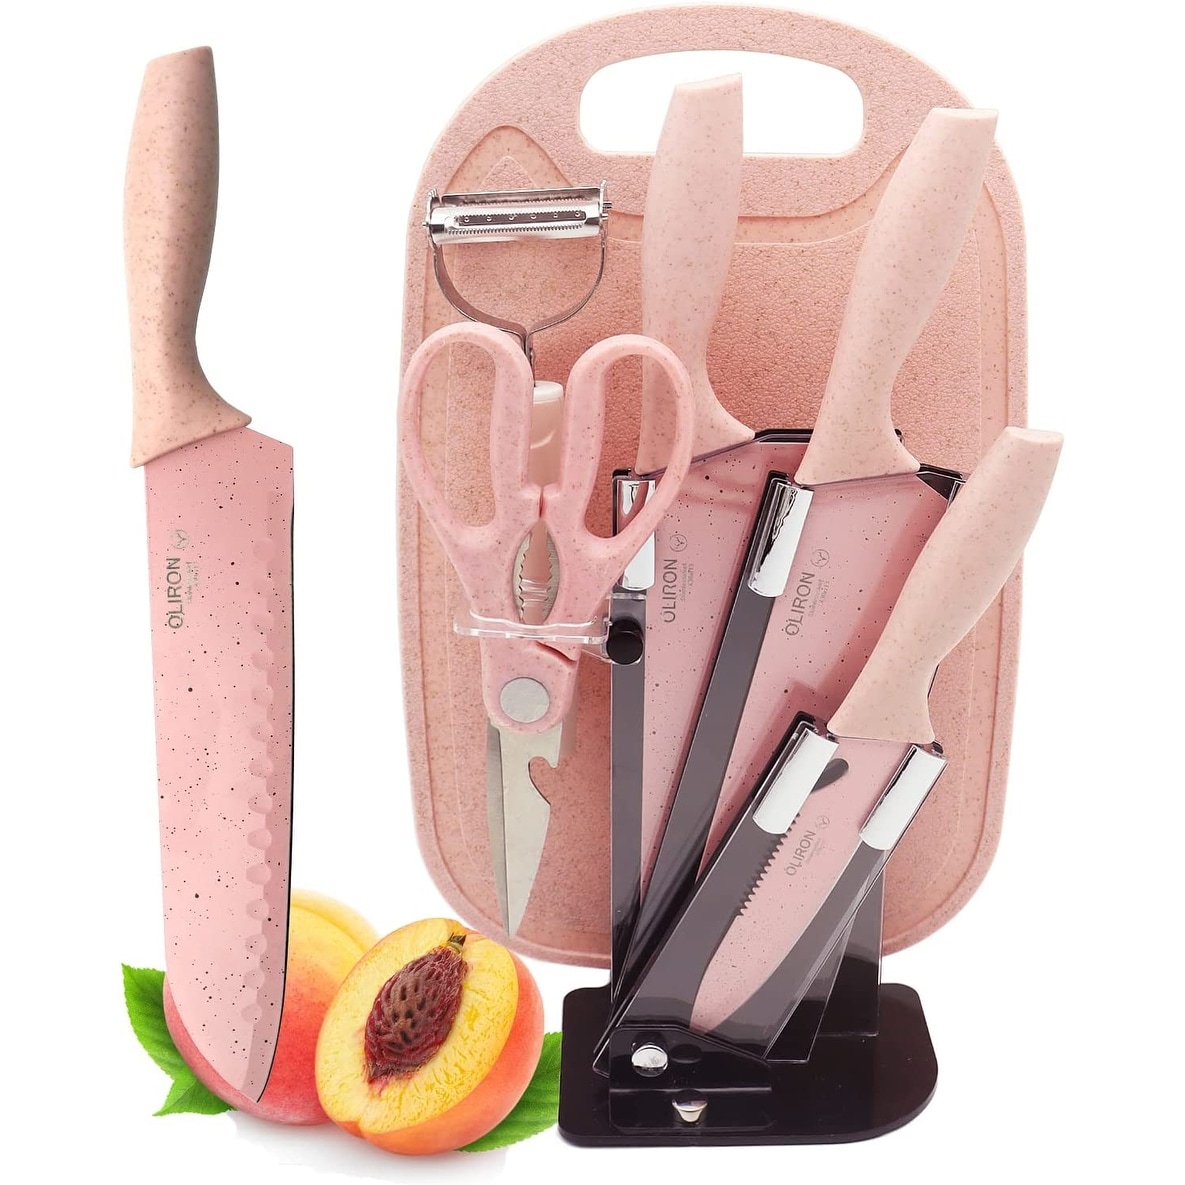 Chef Knife Set, 6 Pieces Stainless Steel Professional Kitchen Knife Set  with Acrylic Stand for Cooking, Lightweight Strong Anti-Slip Pink Knives  Set